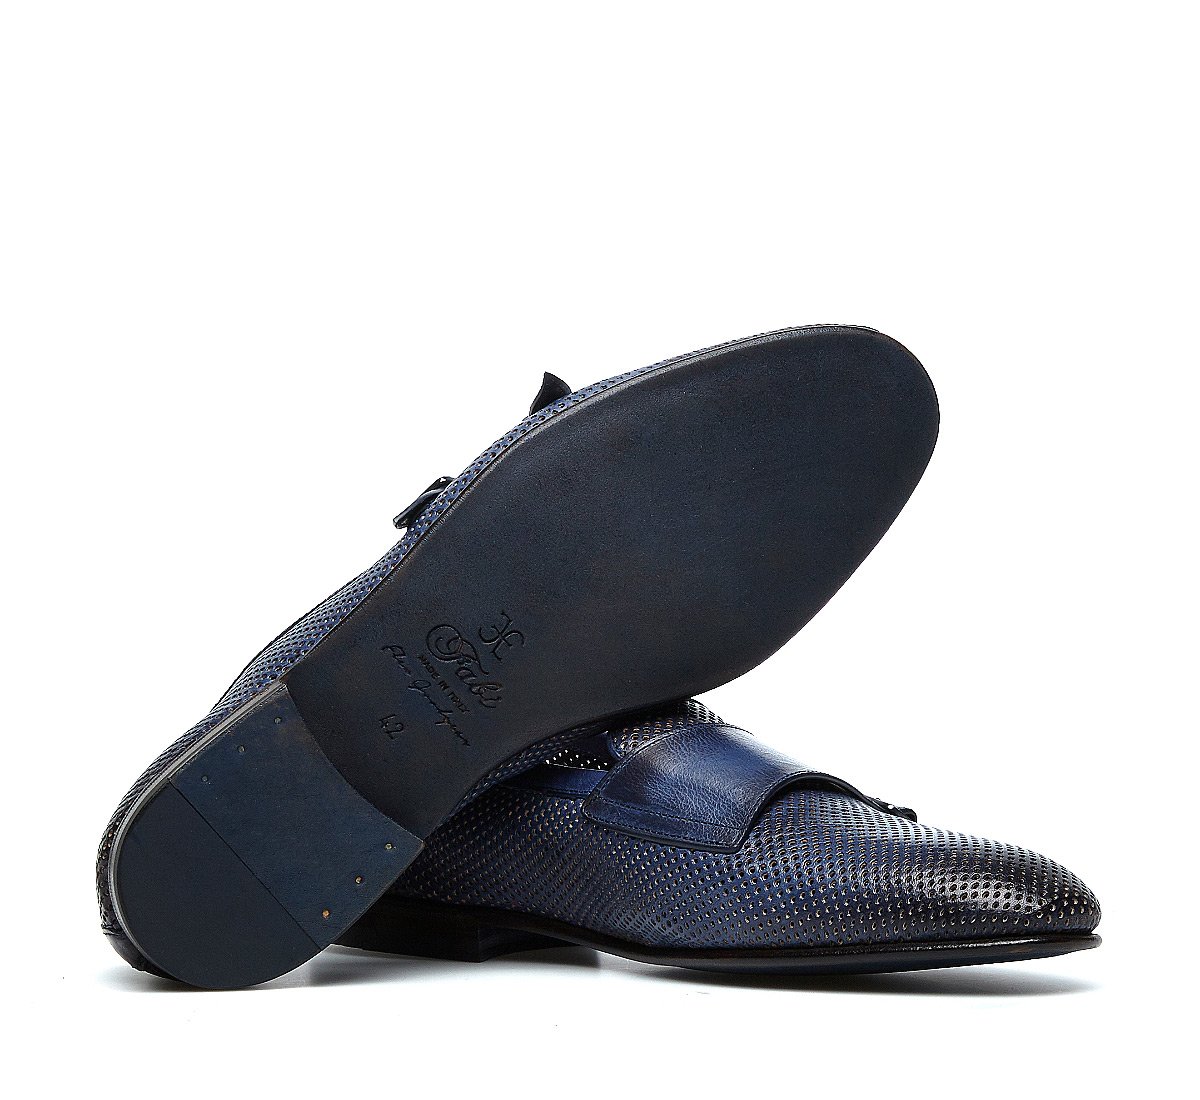 Double-buckle moccasins in exquisite calfskin, constructed using the Goodyear process